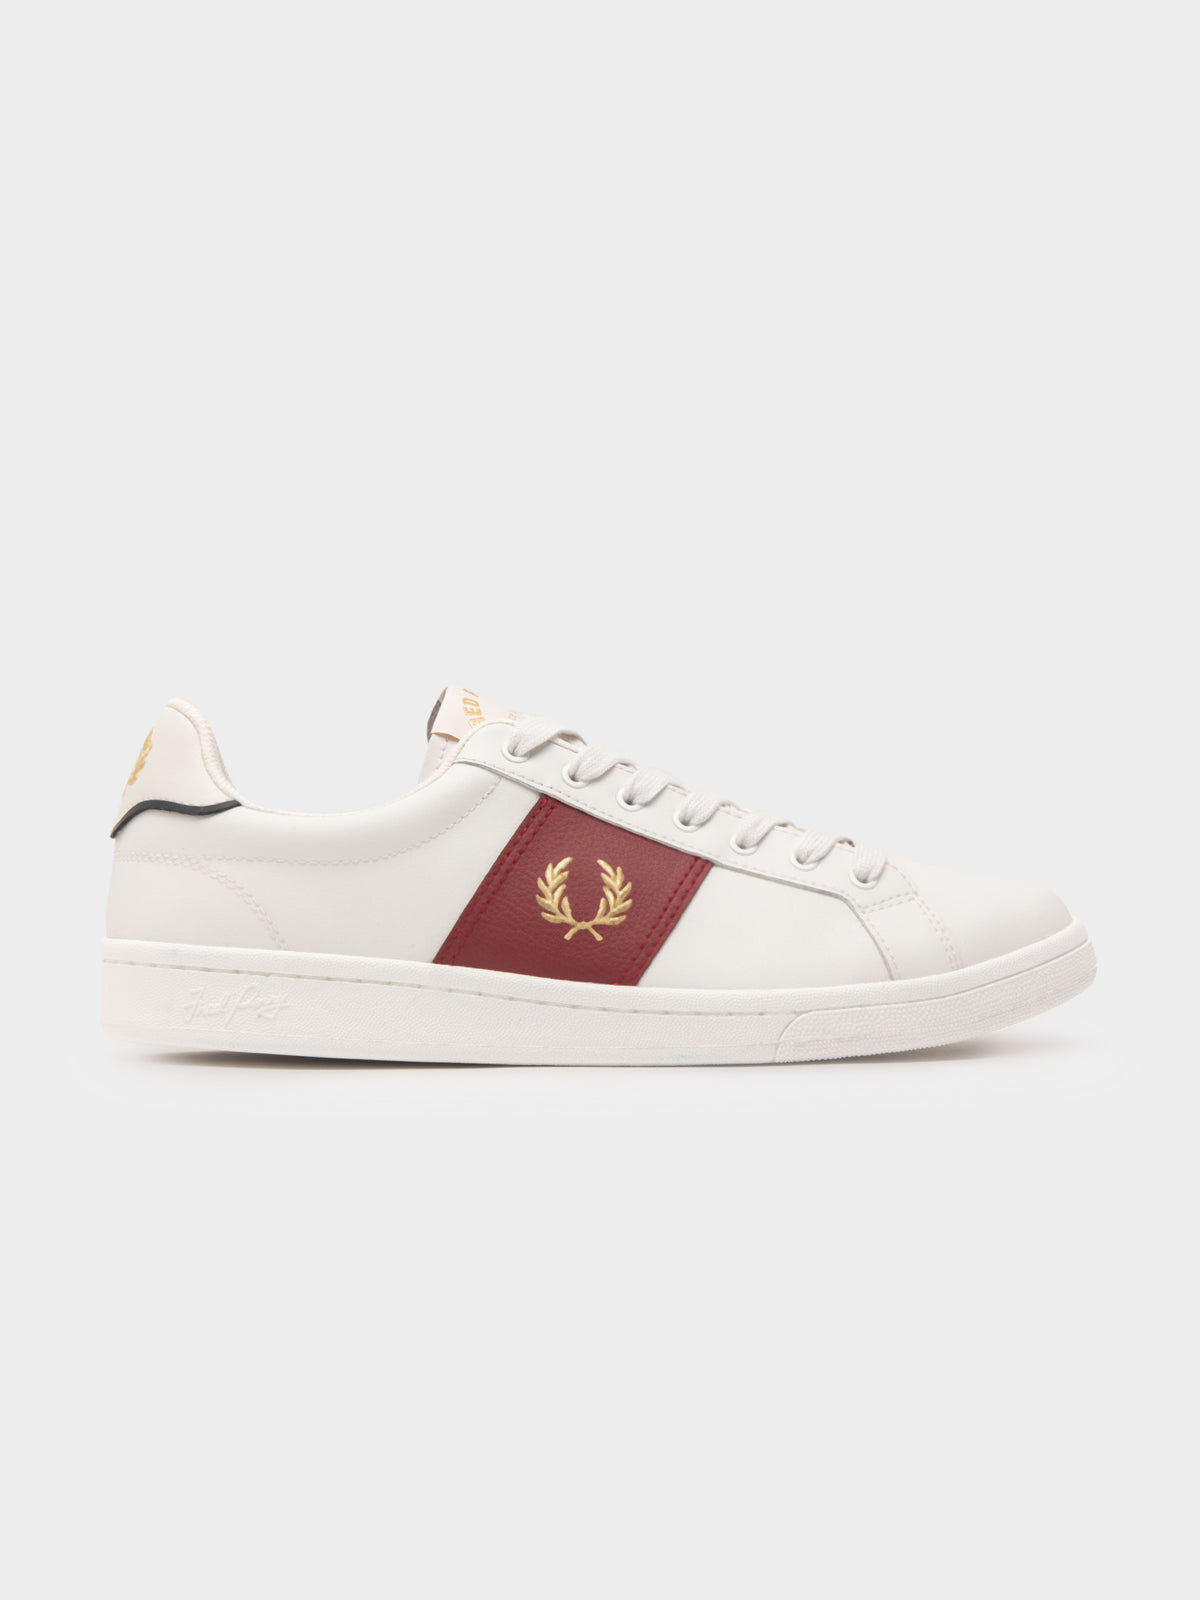 B721 Gold Detail Leather Sneaker in White